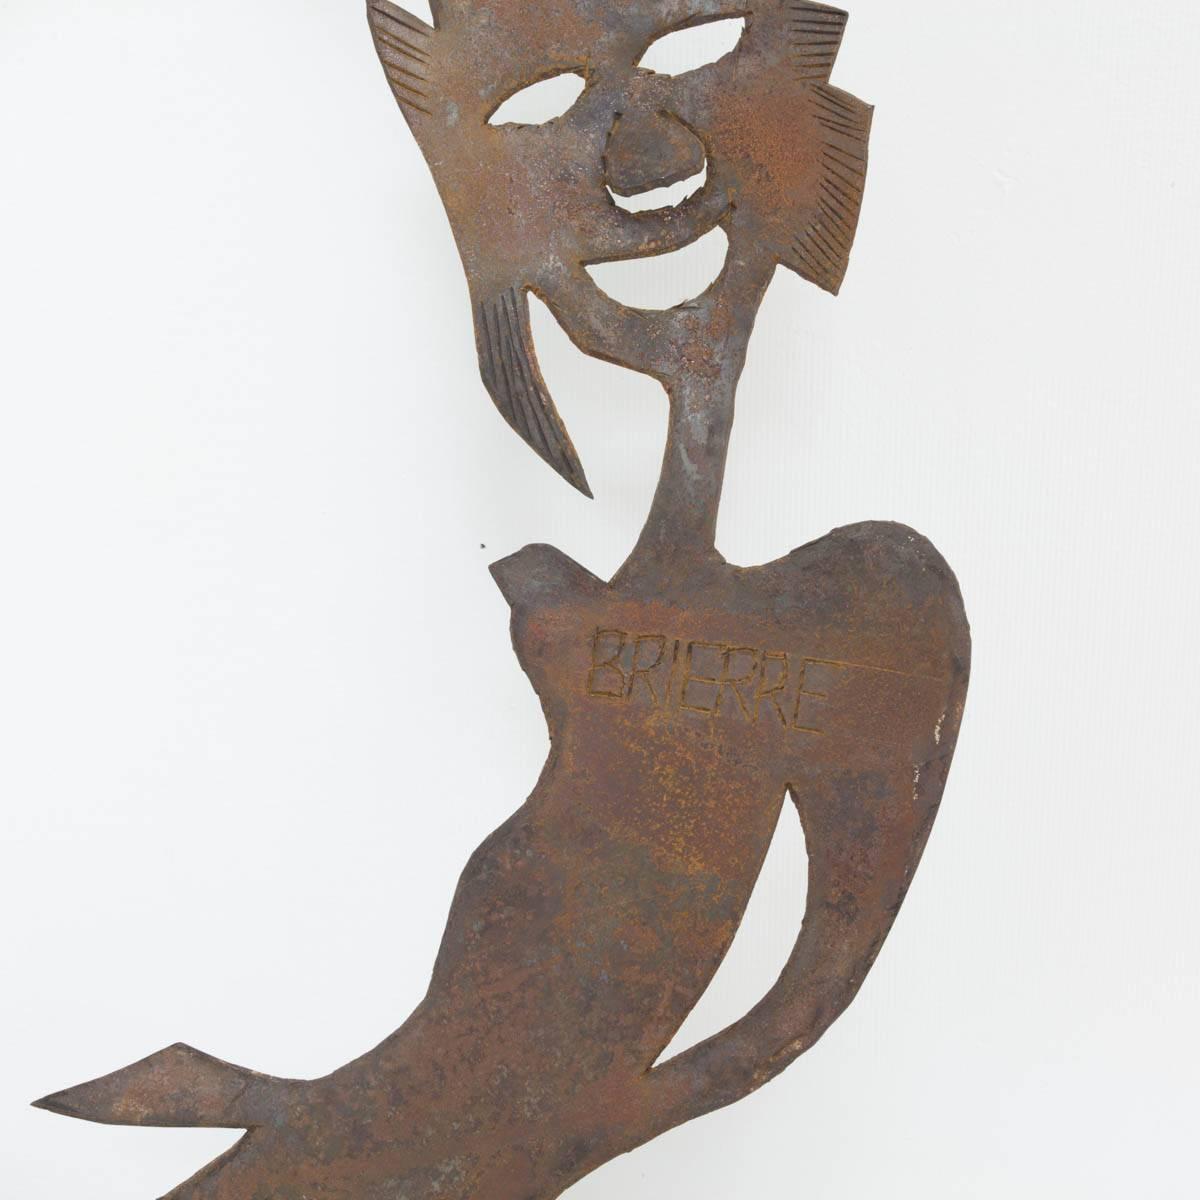 Murat Brierre or Murat Briere (1938–1988) was one of Haiti's principal metal sculptors. He was influenced by George Liautaud, but his work acquired its own, highly experimental style, often focusing on multi-faceted and conjoined figures,